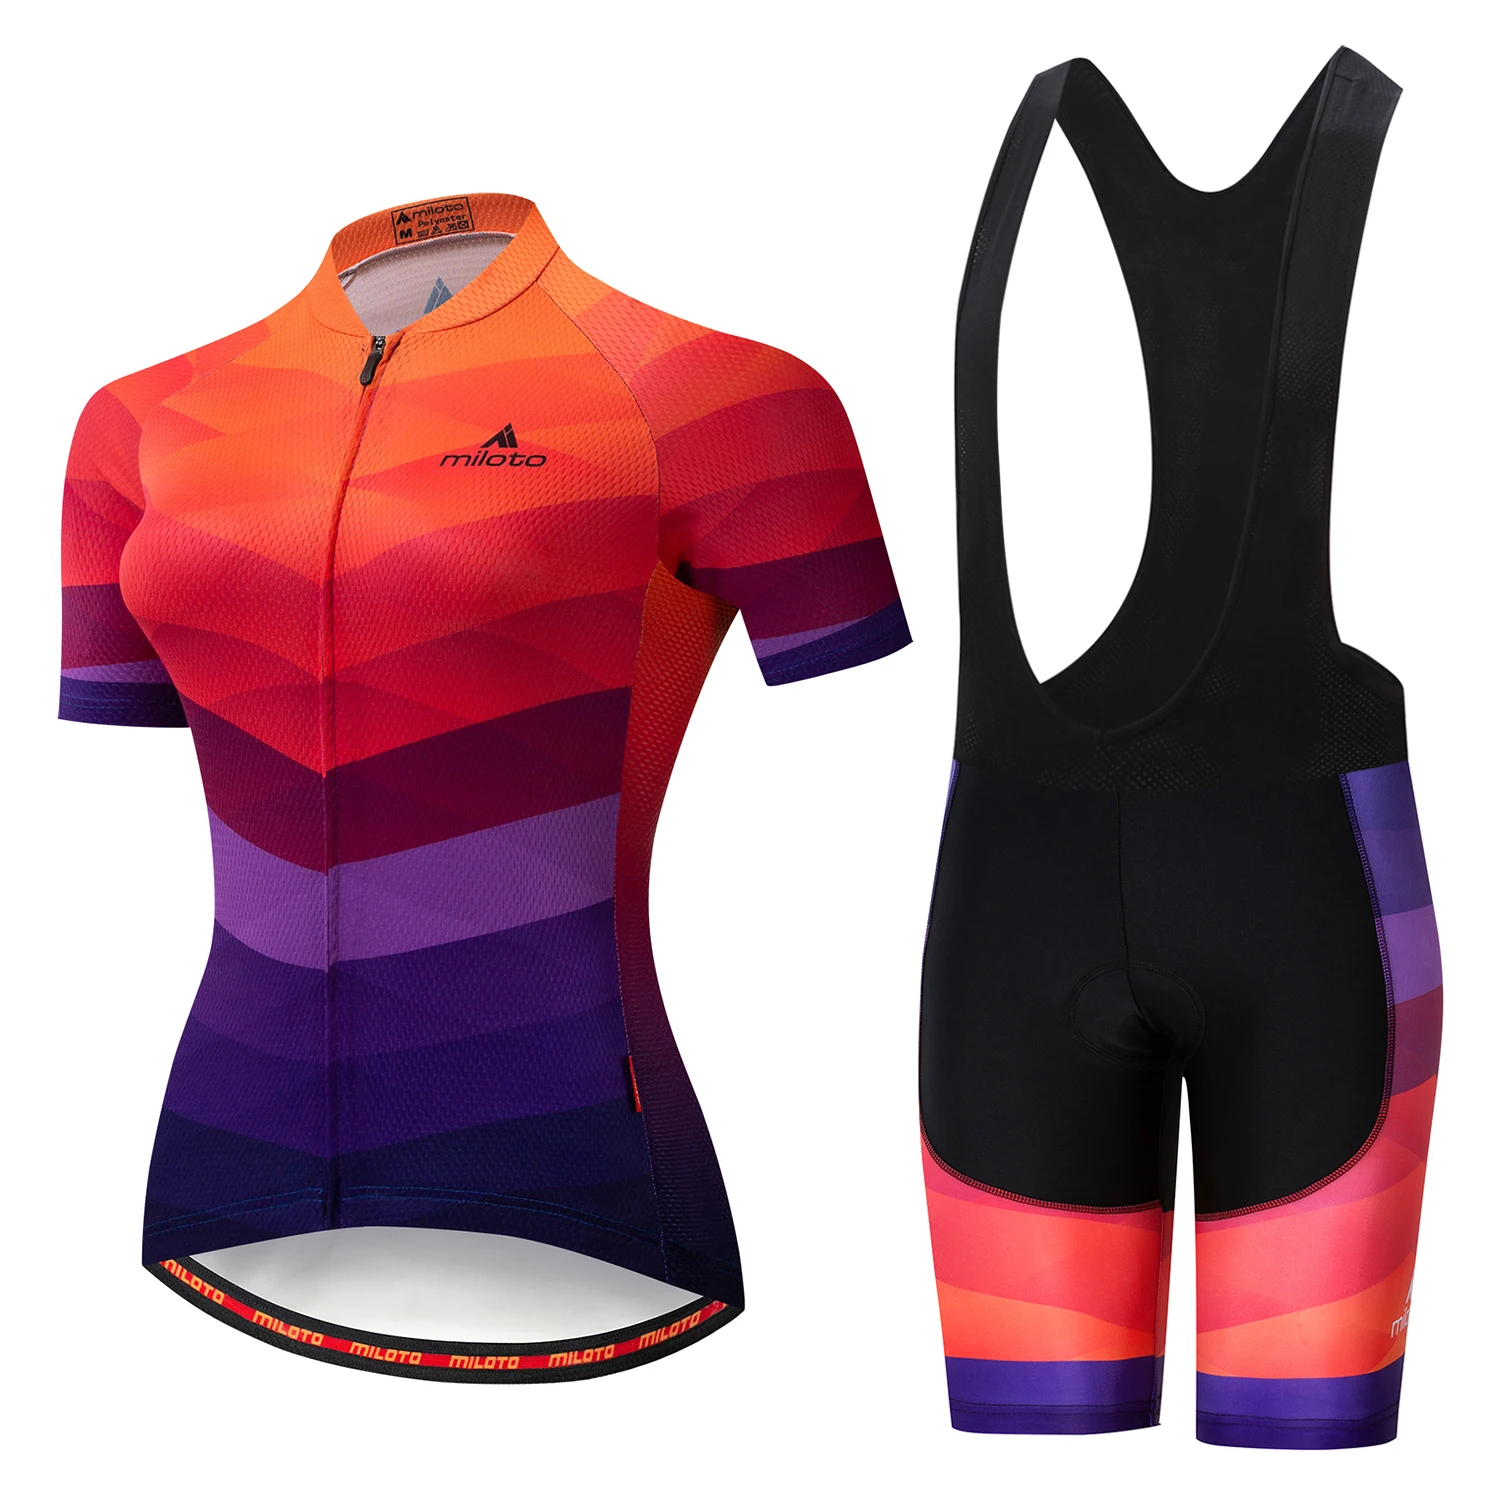 2020 Women's Cycling Jersey Set Summer Ladies Cycling Clothing Girl's Bicycle Bib Shorts Bike Clothes MTB Pants Suit Sport Wear